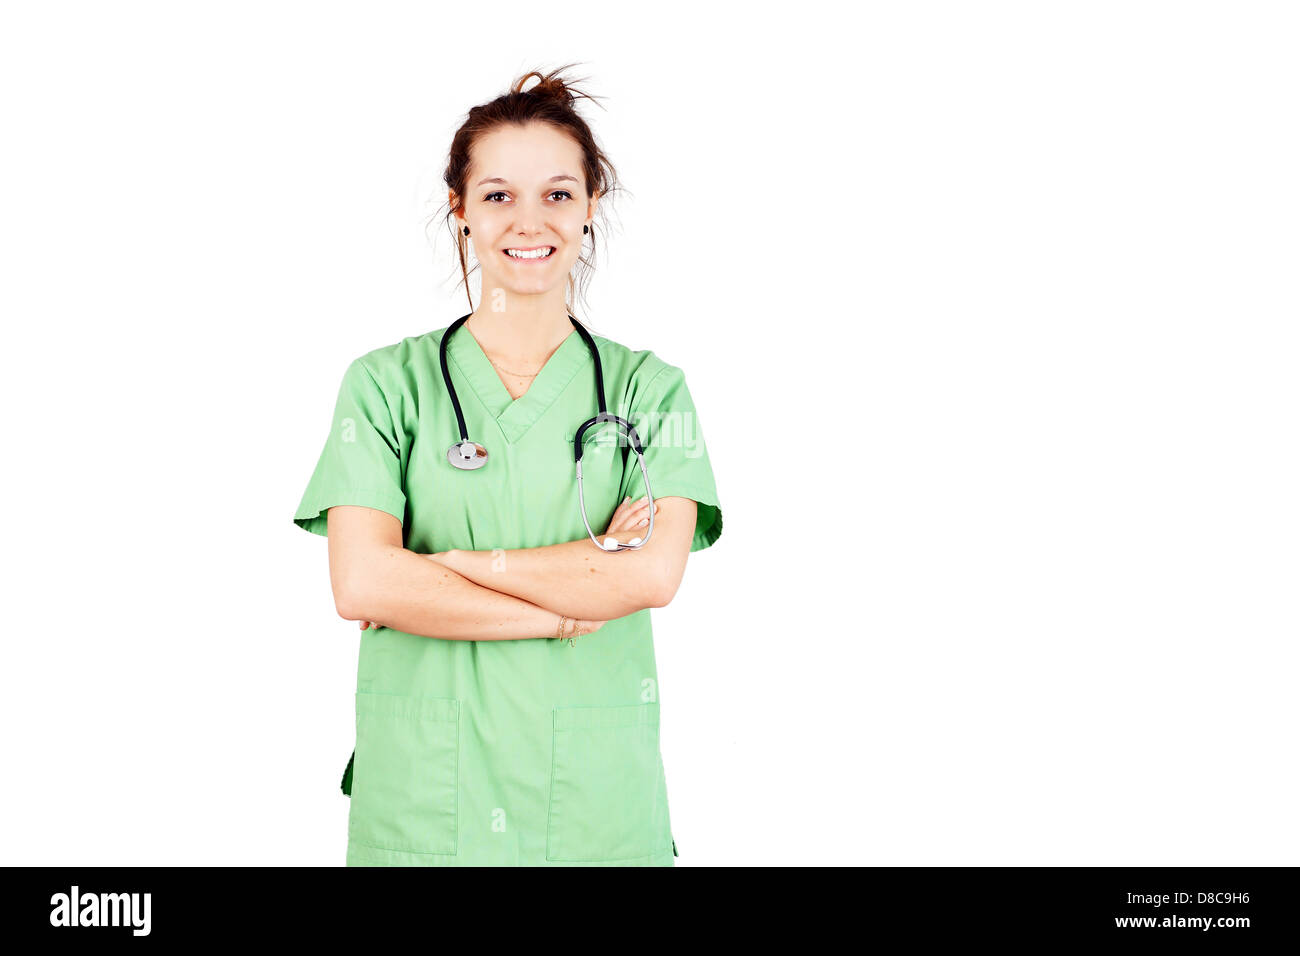 Young nurse or female doctor student in green scrubs smiling Stock Photo